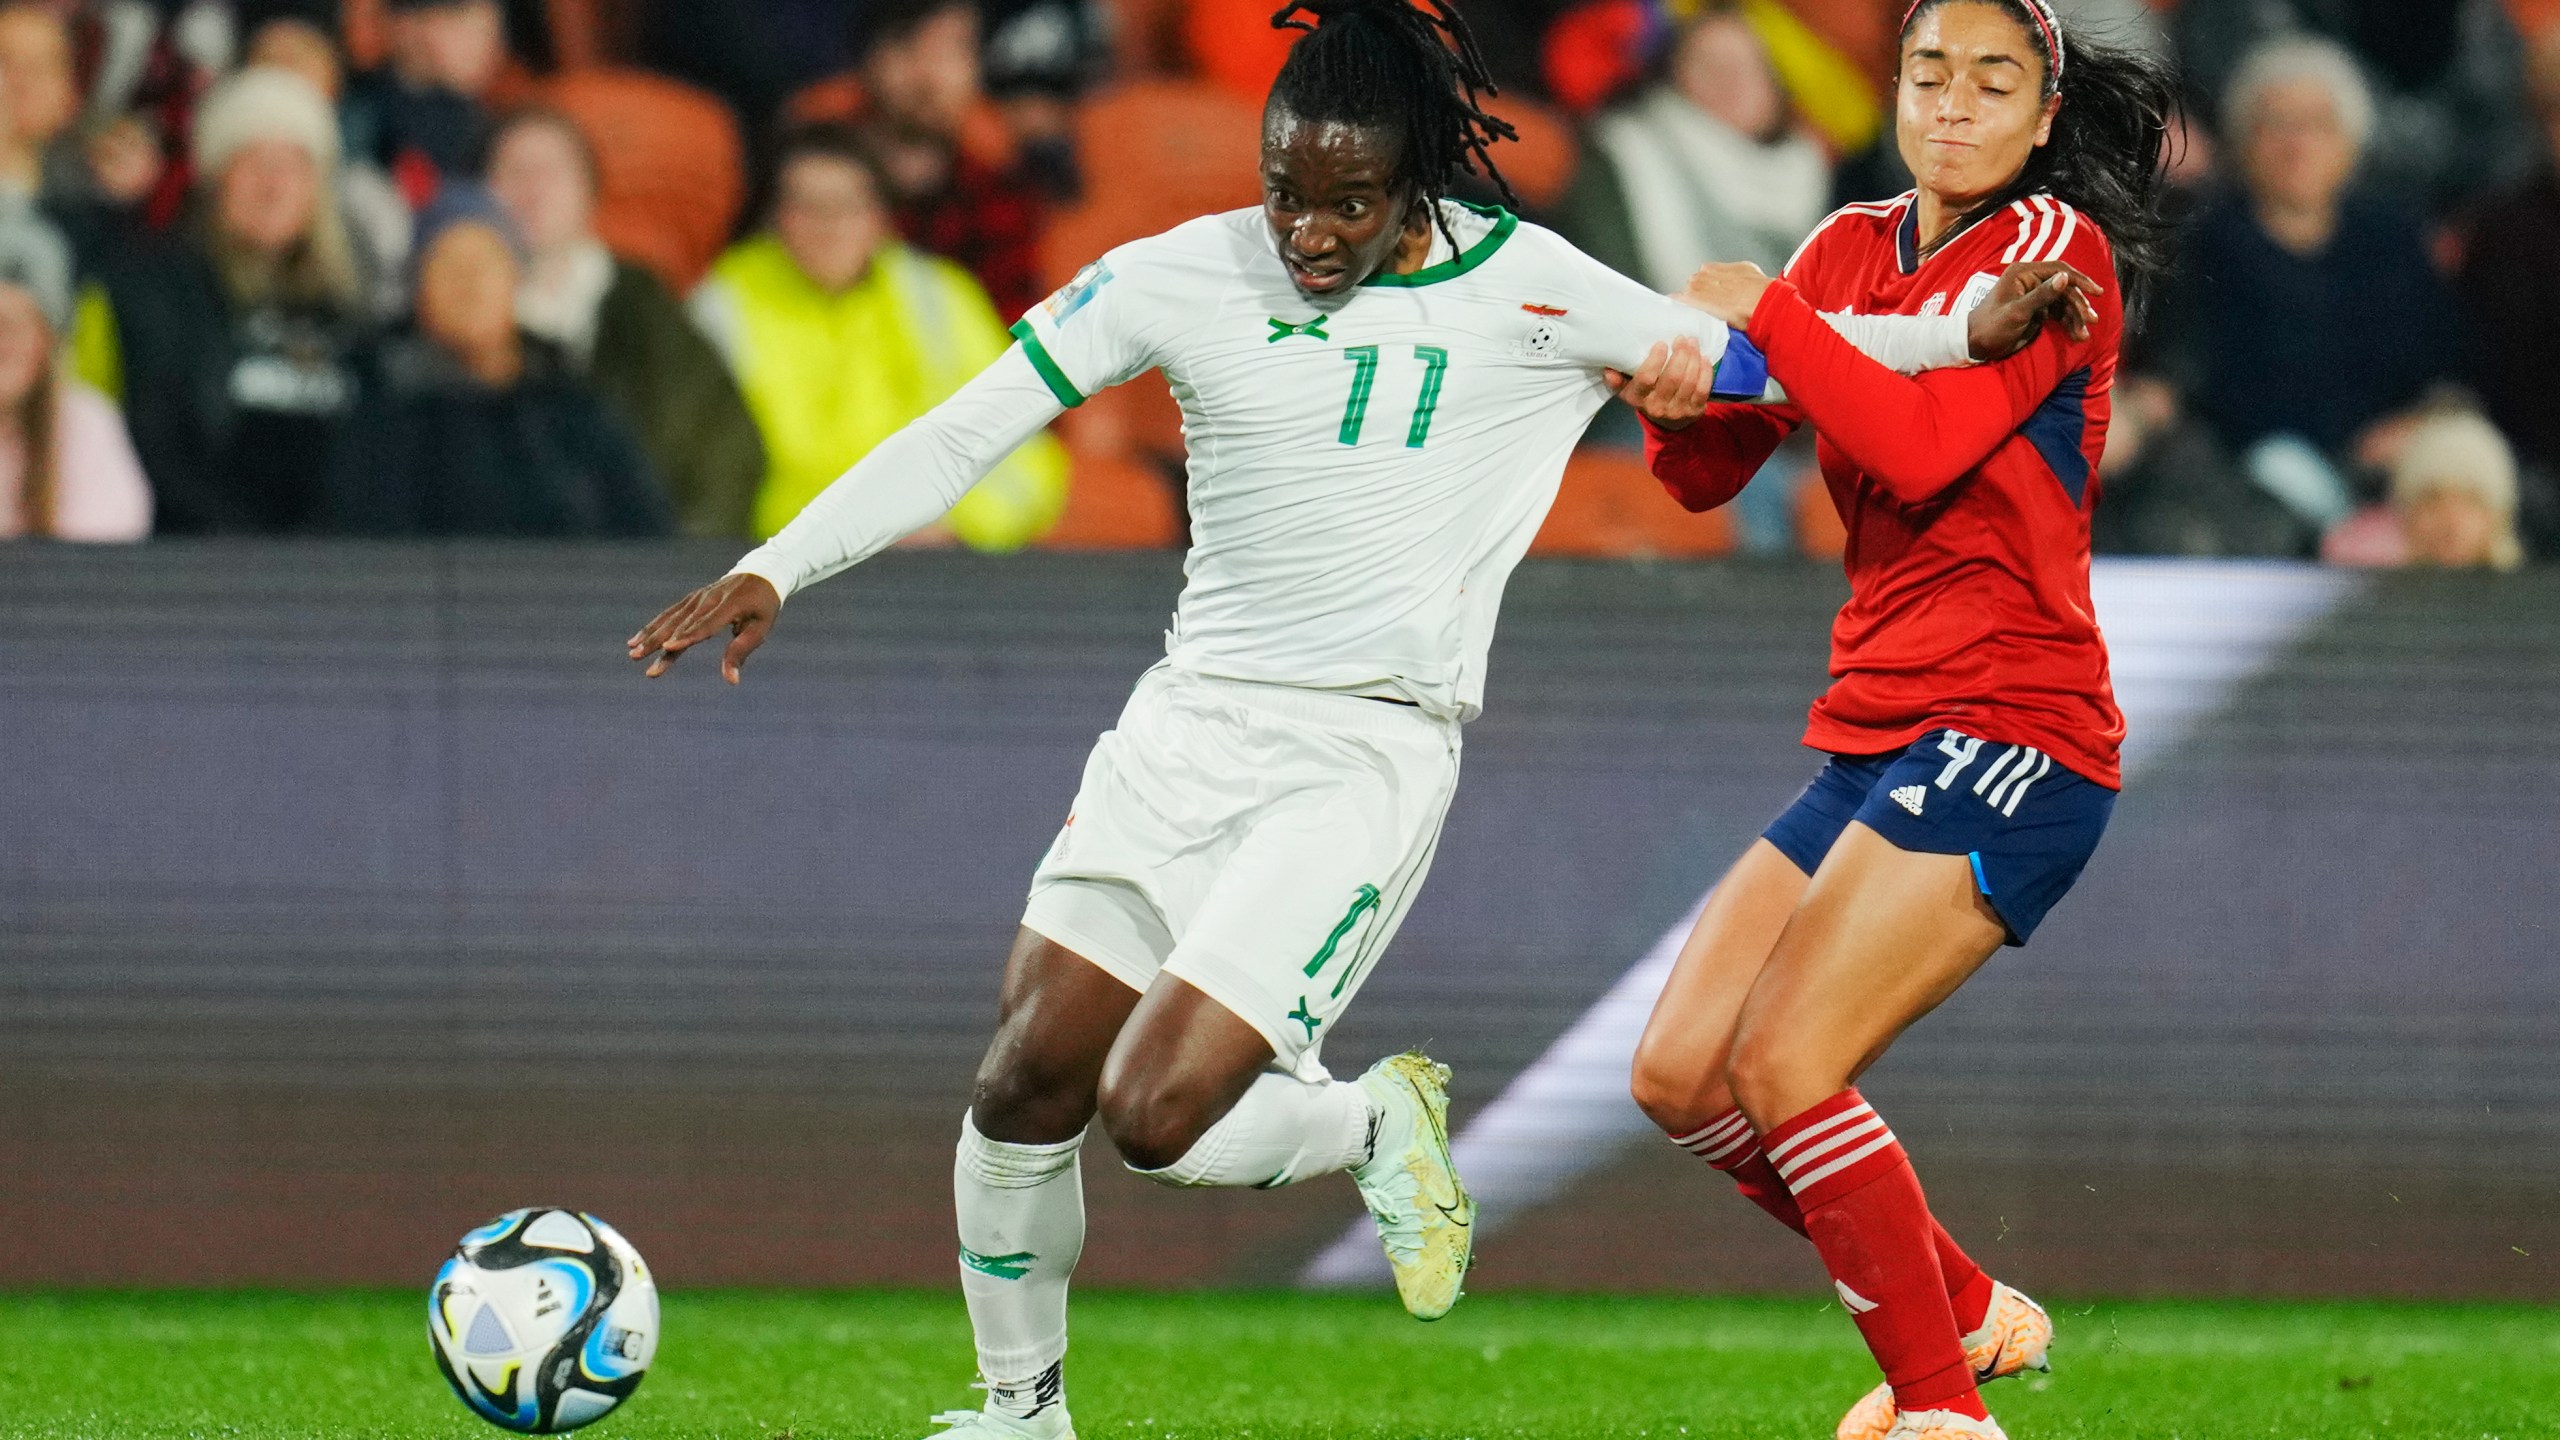 FILE -Costa Rica's Mariana Benavides, right, grabs the arm of Zambia's Barbra Banda as they compete for the ball during the Women's World Cup Group C soccer match between Costa Rica and Zambia in Hamilton, New Zealand, Monday, July 31, 2023. The Orlando Pride of the National Women's Soccer League have acquired Zambian forward Barbra Banda for a club record transfer fee, the team announced Thursday night, March 7, 2024. (AP Photo/Abbie Parr, File)